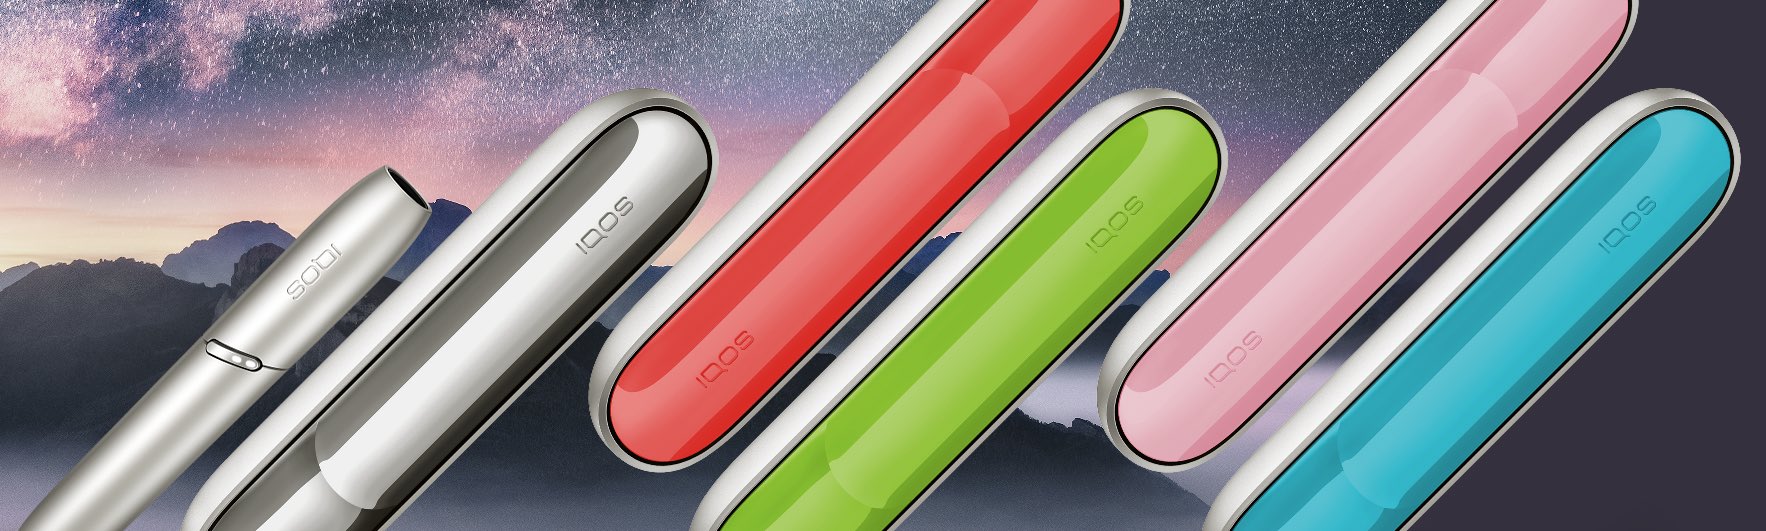 New IQOS Limited Edition Products | News | IQOS Jordan